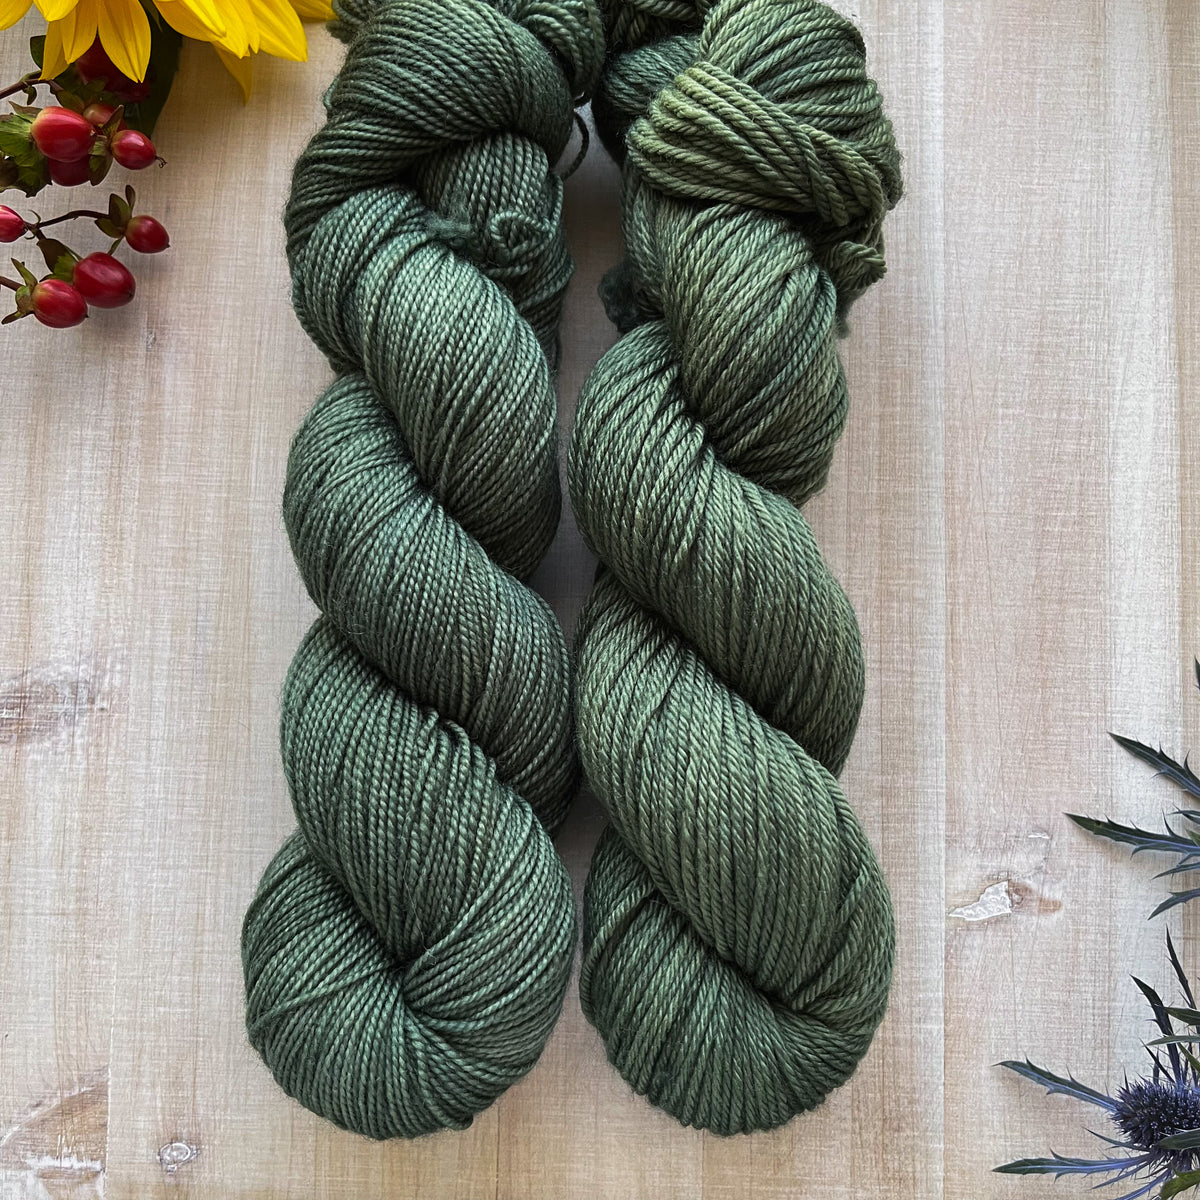 EVERGREENS - Dyed to Order - Hand Dyed Yarn Skein - Tippy Tree Yarns